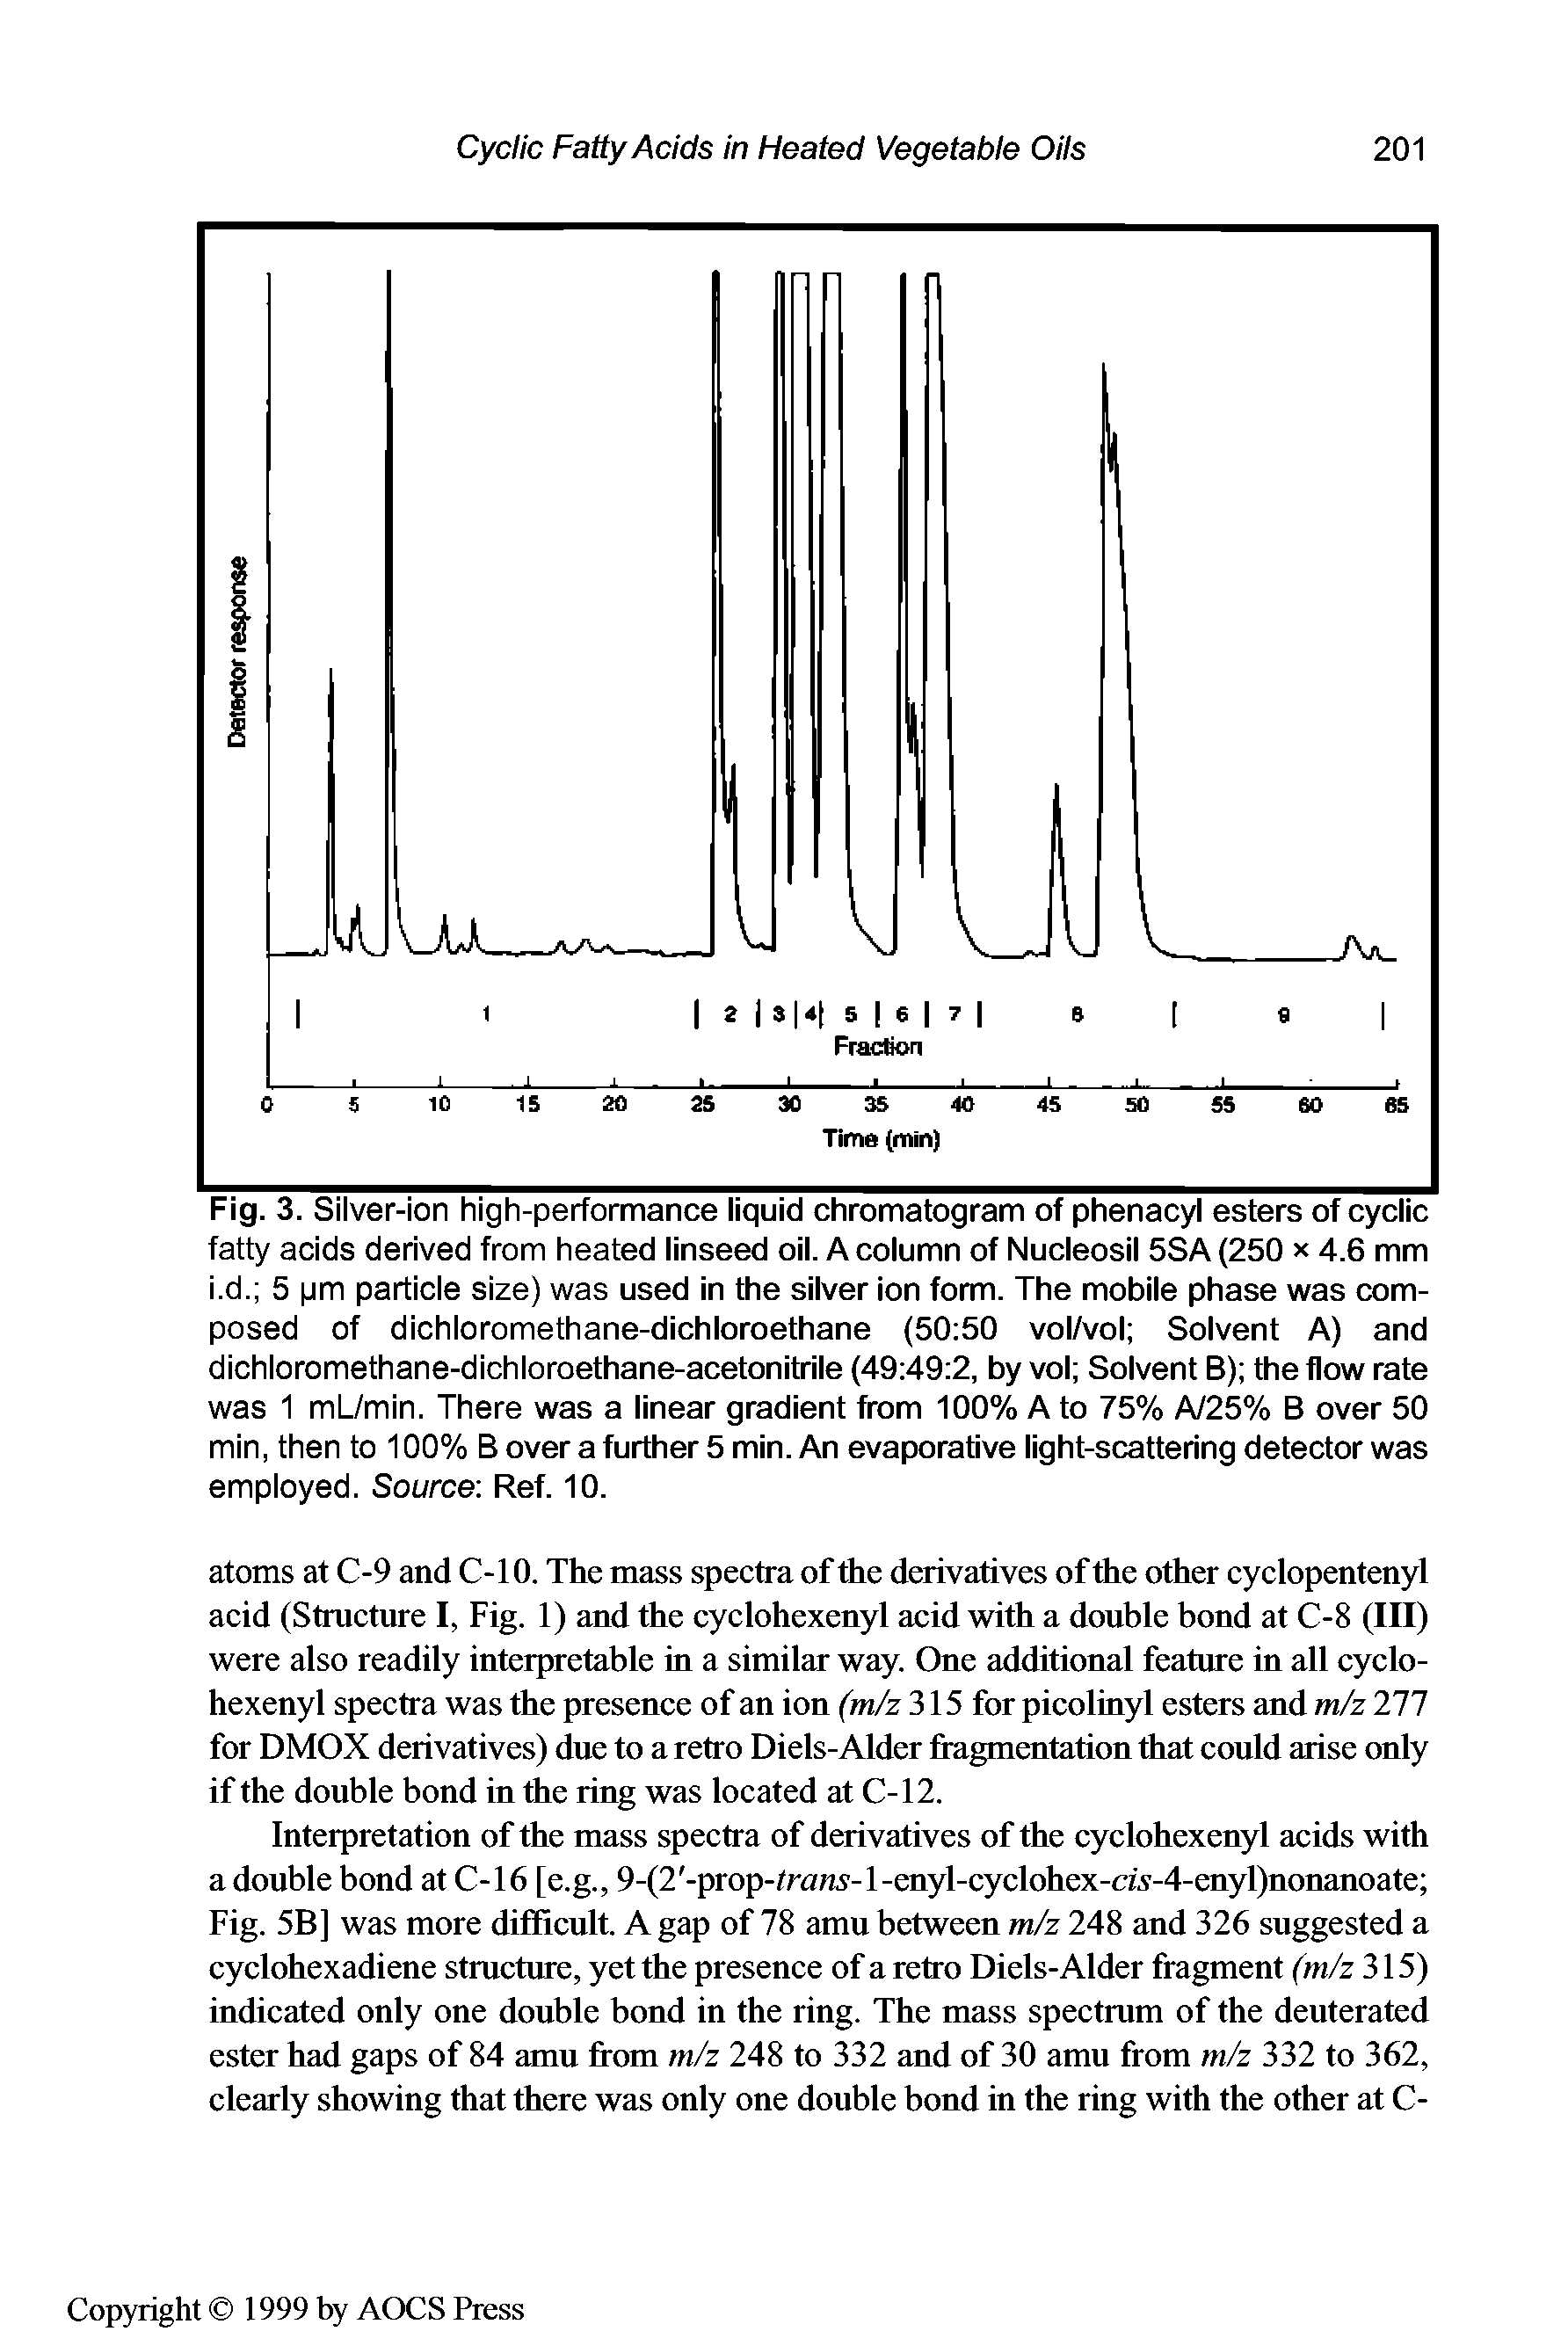 Fig. 3. Silver-ion high-performance liquid chromatogram of phenacyl esters of cyclic fatty acids derived from heated linseed oil. A column of Nucleosil 5SA (250 x 4.6 mm i.d. 5 pm particle size) was used in the silver ion form. The mobile phase was composed of dichloromethane-dichloroethane (50 50 vol/vol Solvent A) and dichloromethane-dichloroethane-acetonitrile (49 49 2, by vol Solvent B) the flow rate was 1 mL/min. There was a linear gradient from 100% A to 75% A/25% B over 50 min, then to 100% B over a further 5 min. An evaporative light-scattering detector was employed. Source Ref. 10.